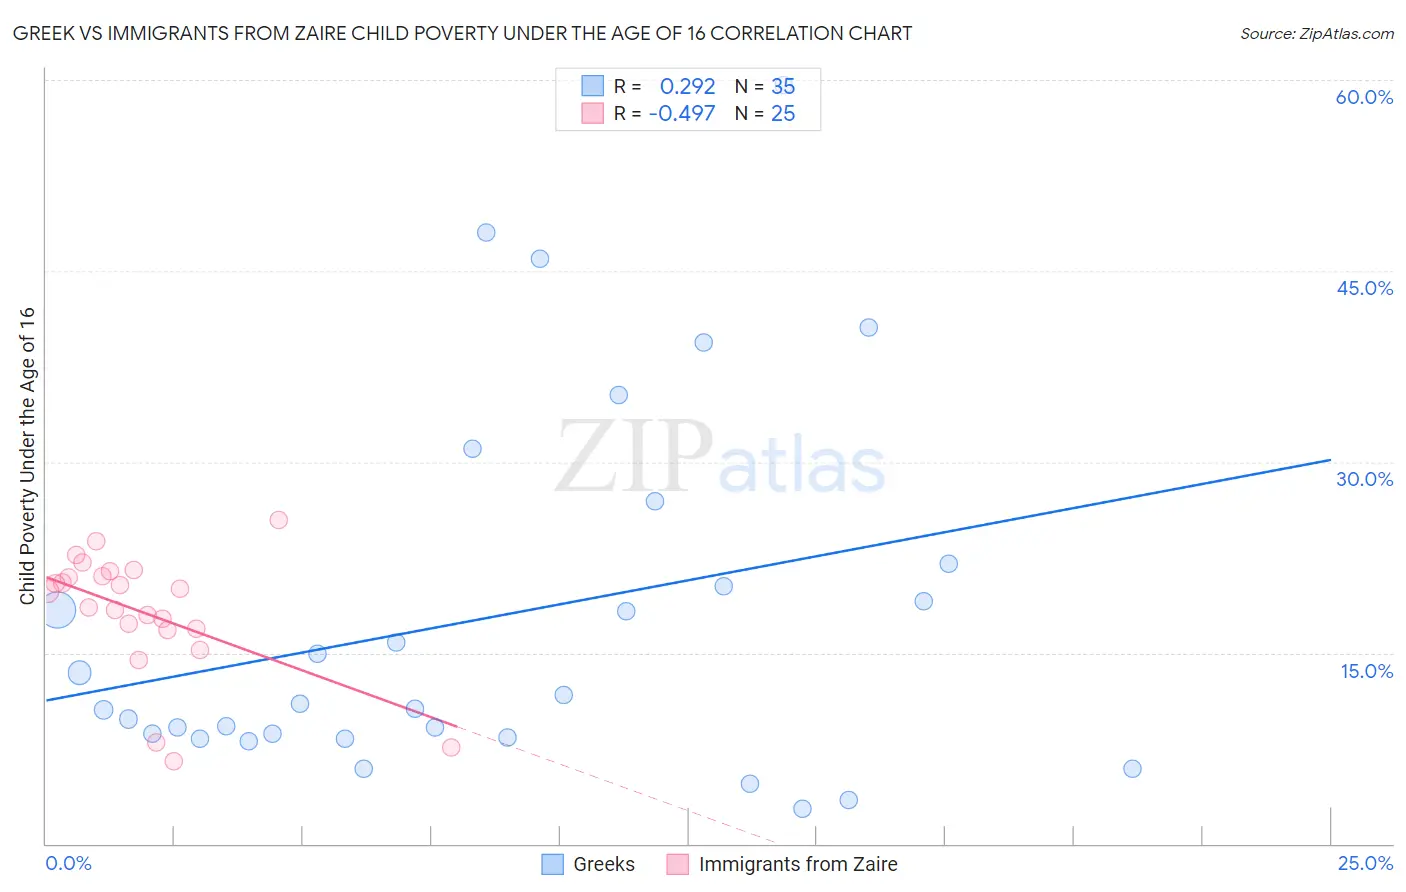 Greek vs Immigrants from Zaire Child Poverty Under the Age of 16